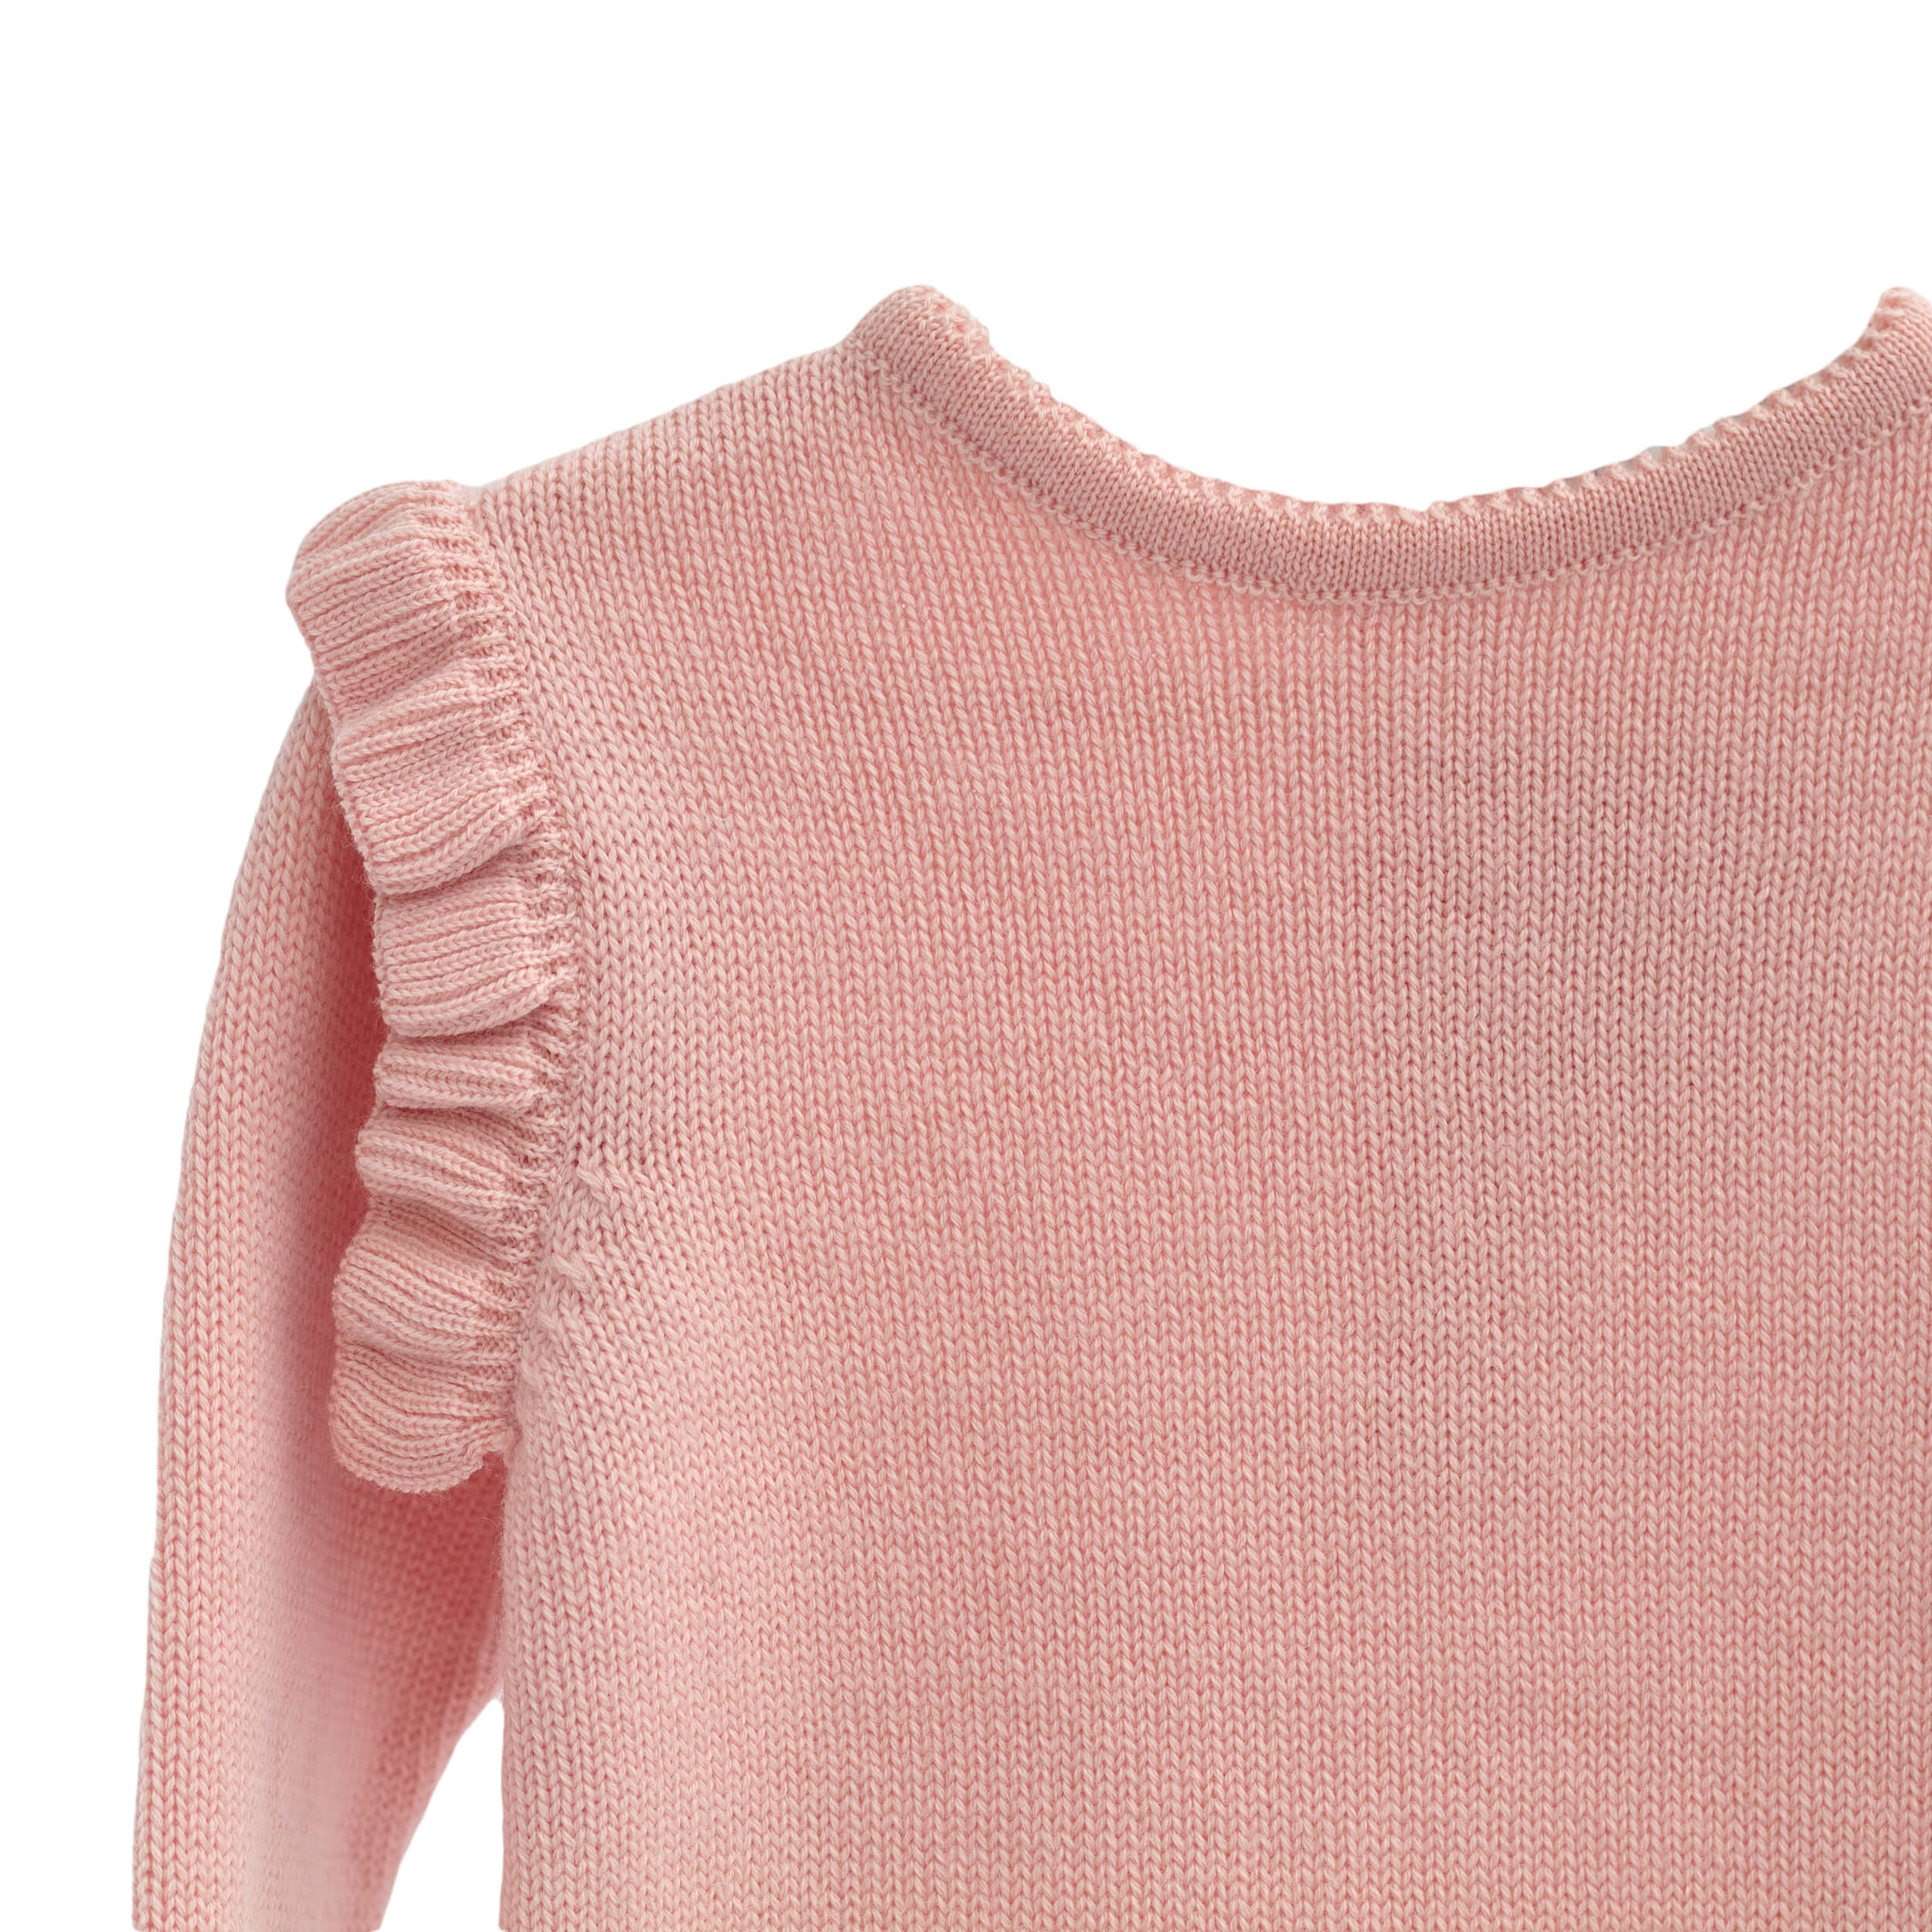 close up wedoble baby sweater pink, made in portugal